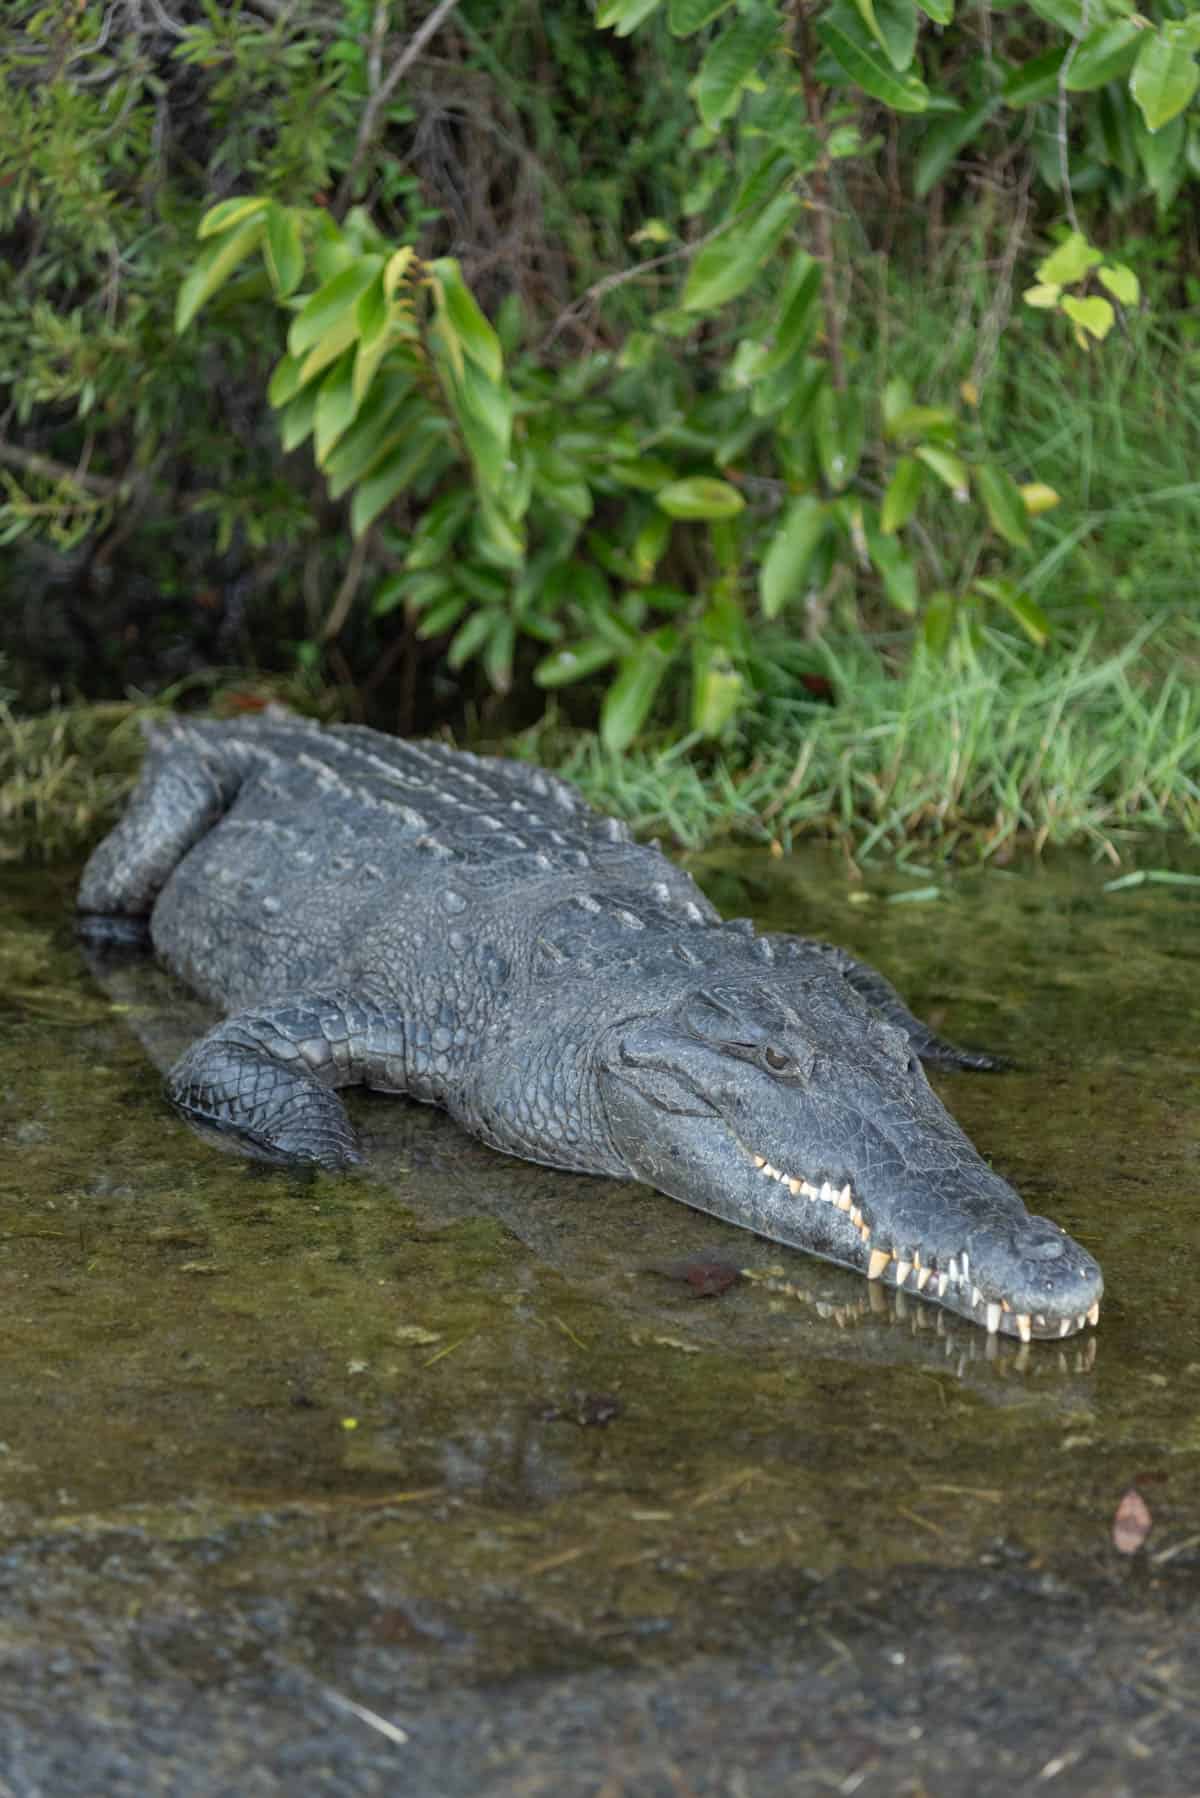 A close image of a crocodile in Everglades National Park.